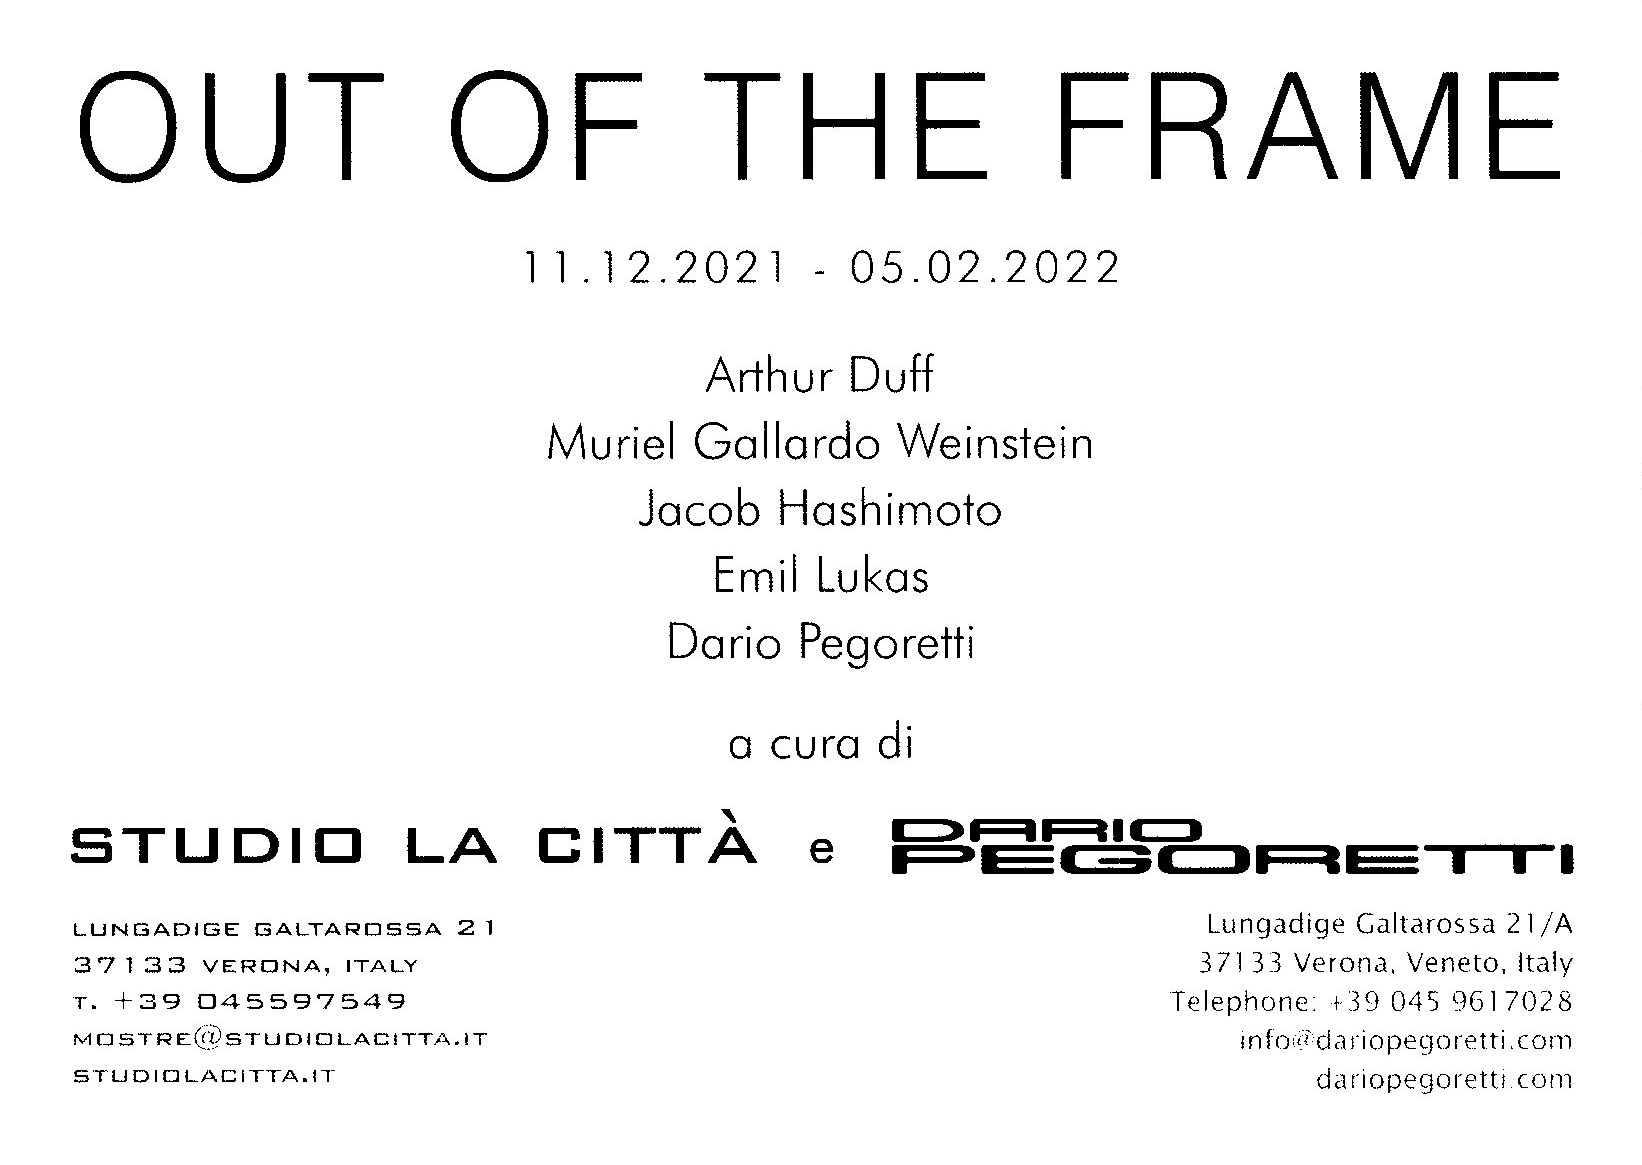 Out of The Frame, A celebration of the lif of Dario Pegoretti